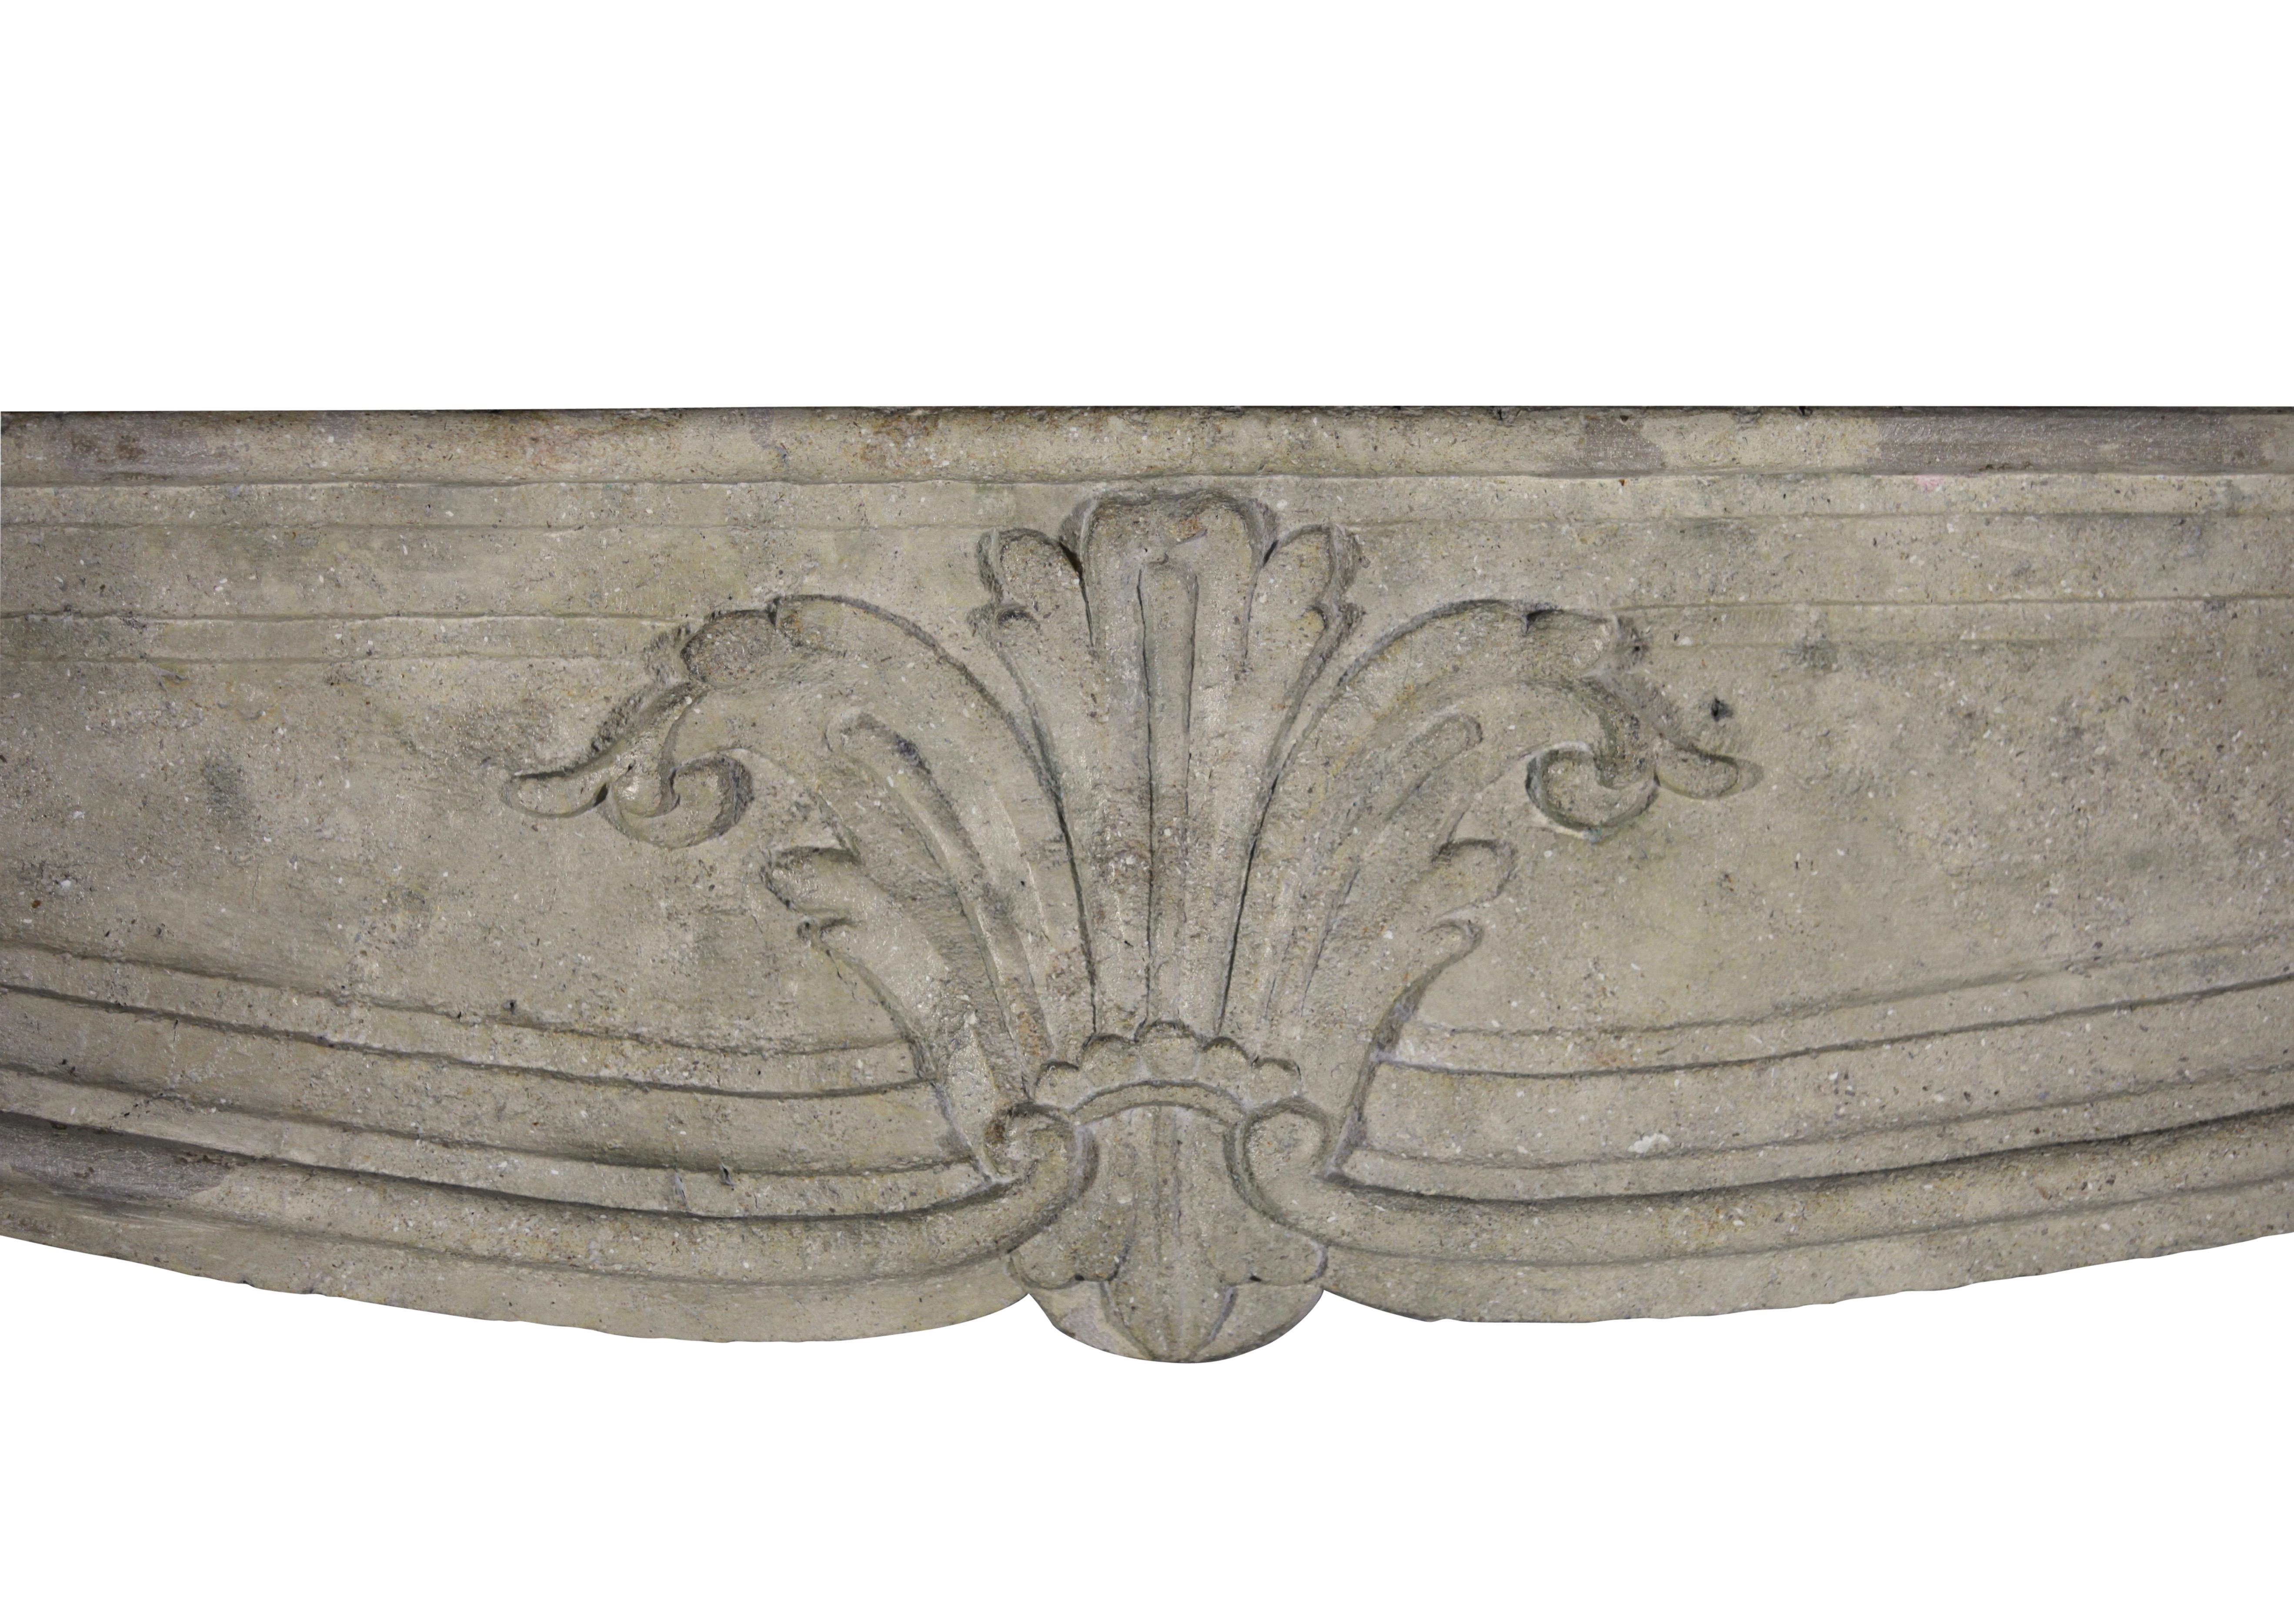 This original antique French country fireplace surround in limestone is from the Louise XIV Period. The mantle has been waxed and has a silky touch feeling the surface.
The dimensions are particular grand.
The mantle was polychromed. There is